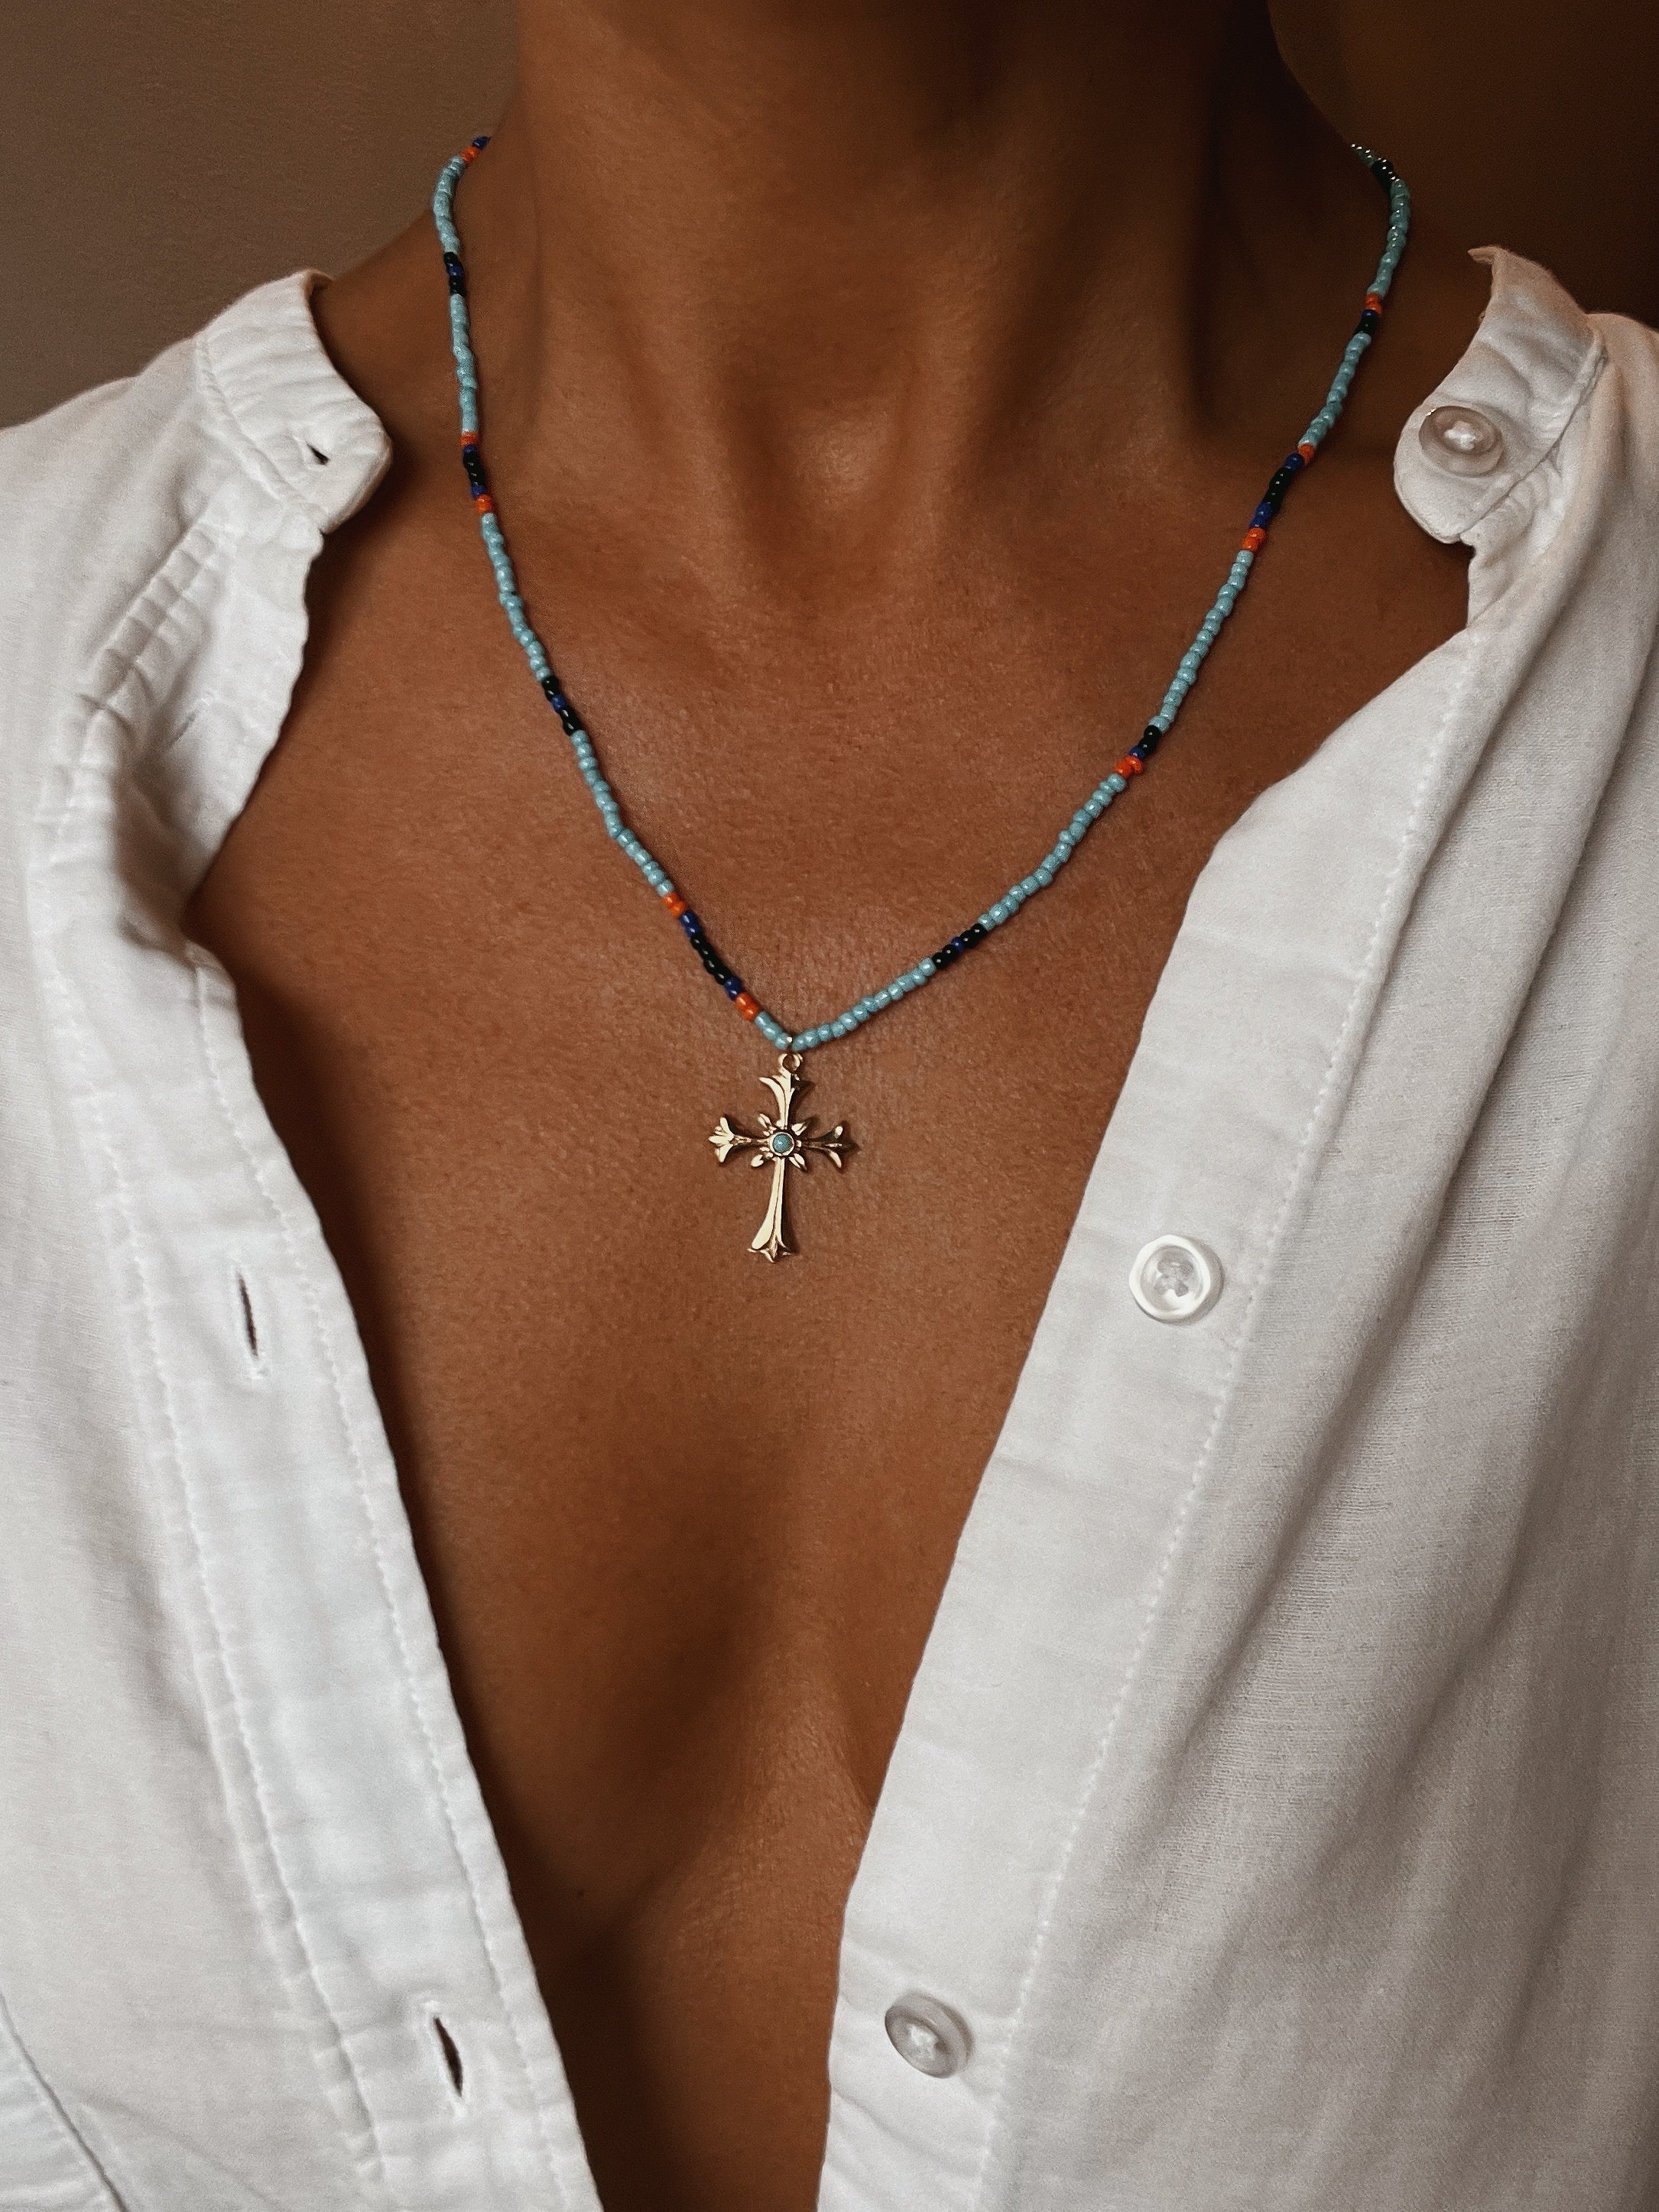 Multi Stone Turquoise Cross Necklace Boho Bohemia Jewelry Accessories for  Women Navajo Christian Gift TURQUOISE CROSS